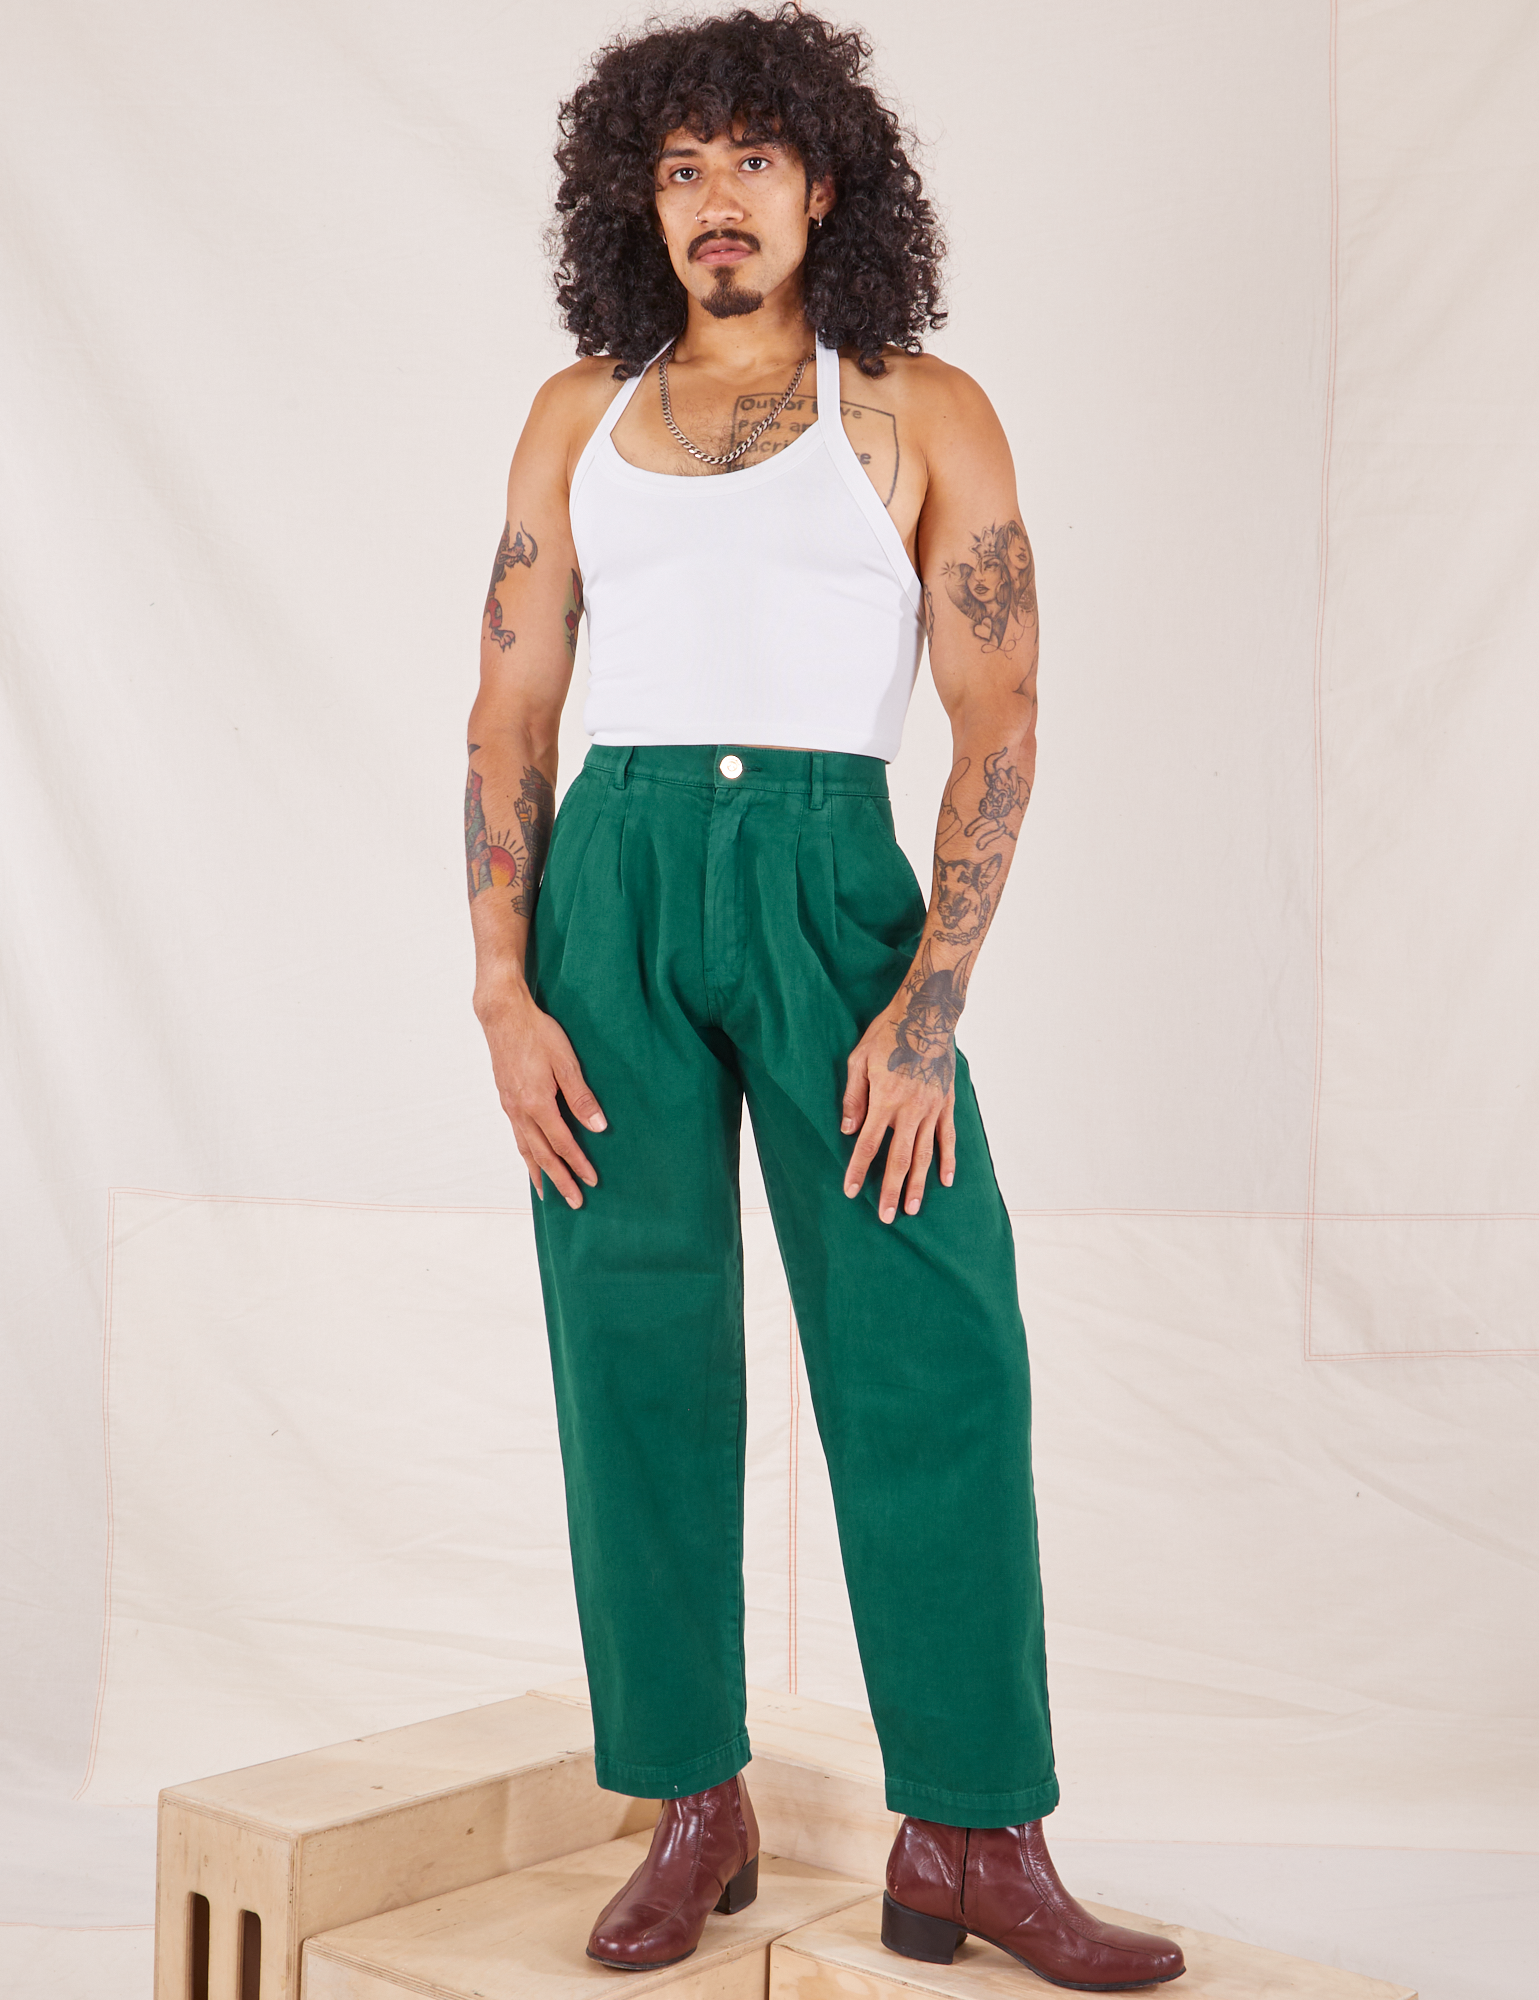 Jesse is 5'8" and wearing XXS Heavyweight Trousers in Hunter Green paired with vintage off-white Halter Top